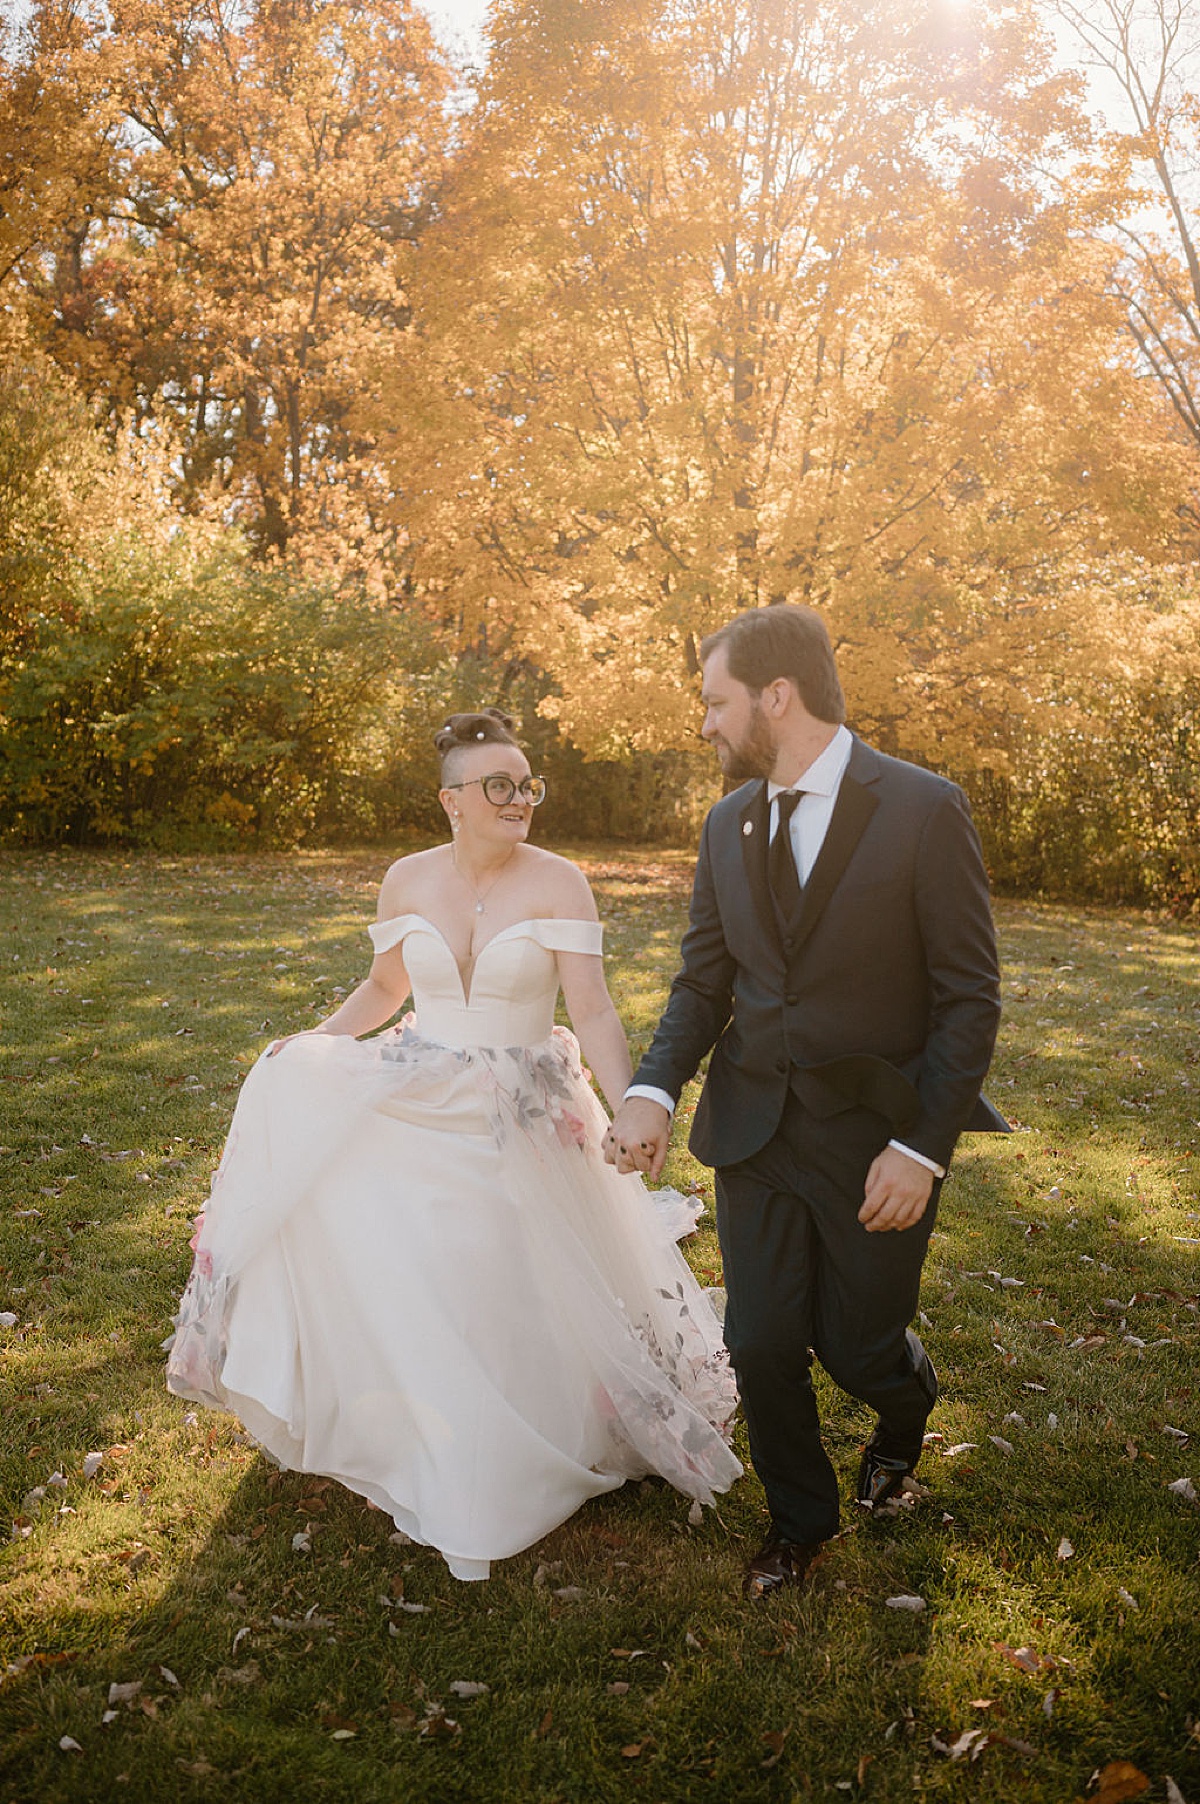 cute artsy couple pose for midwest wedding photographer after autumn ceremony